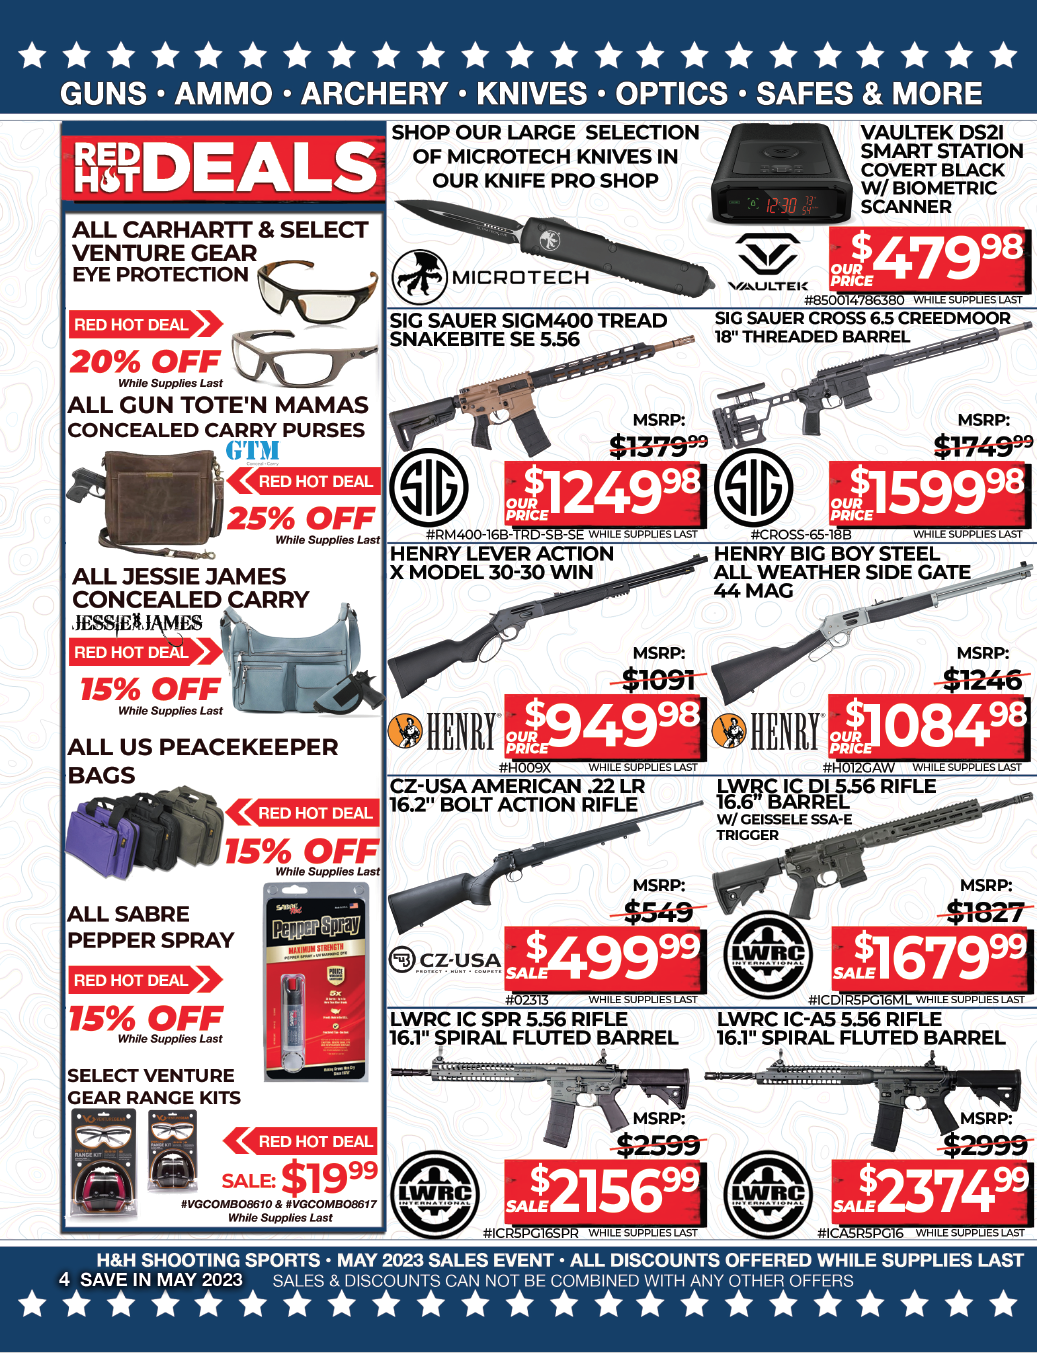 Save in May 2023 Sales Event Page 4